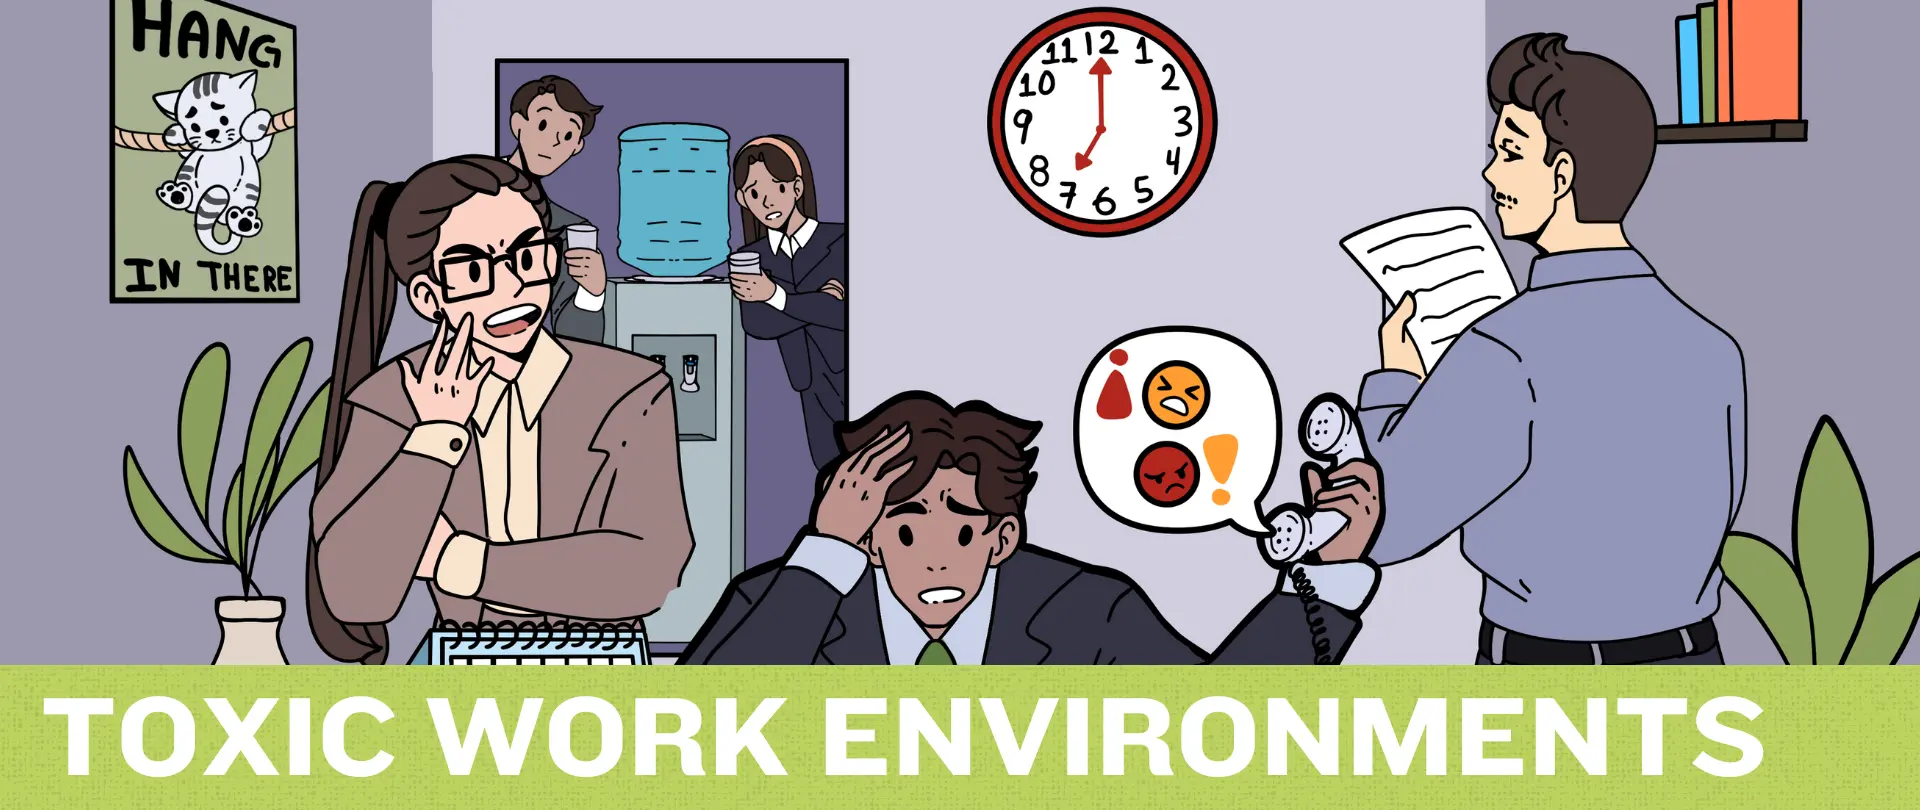 Illustration of a person overwhelmed by a toxic work environment